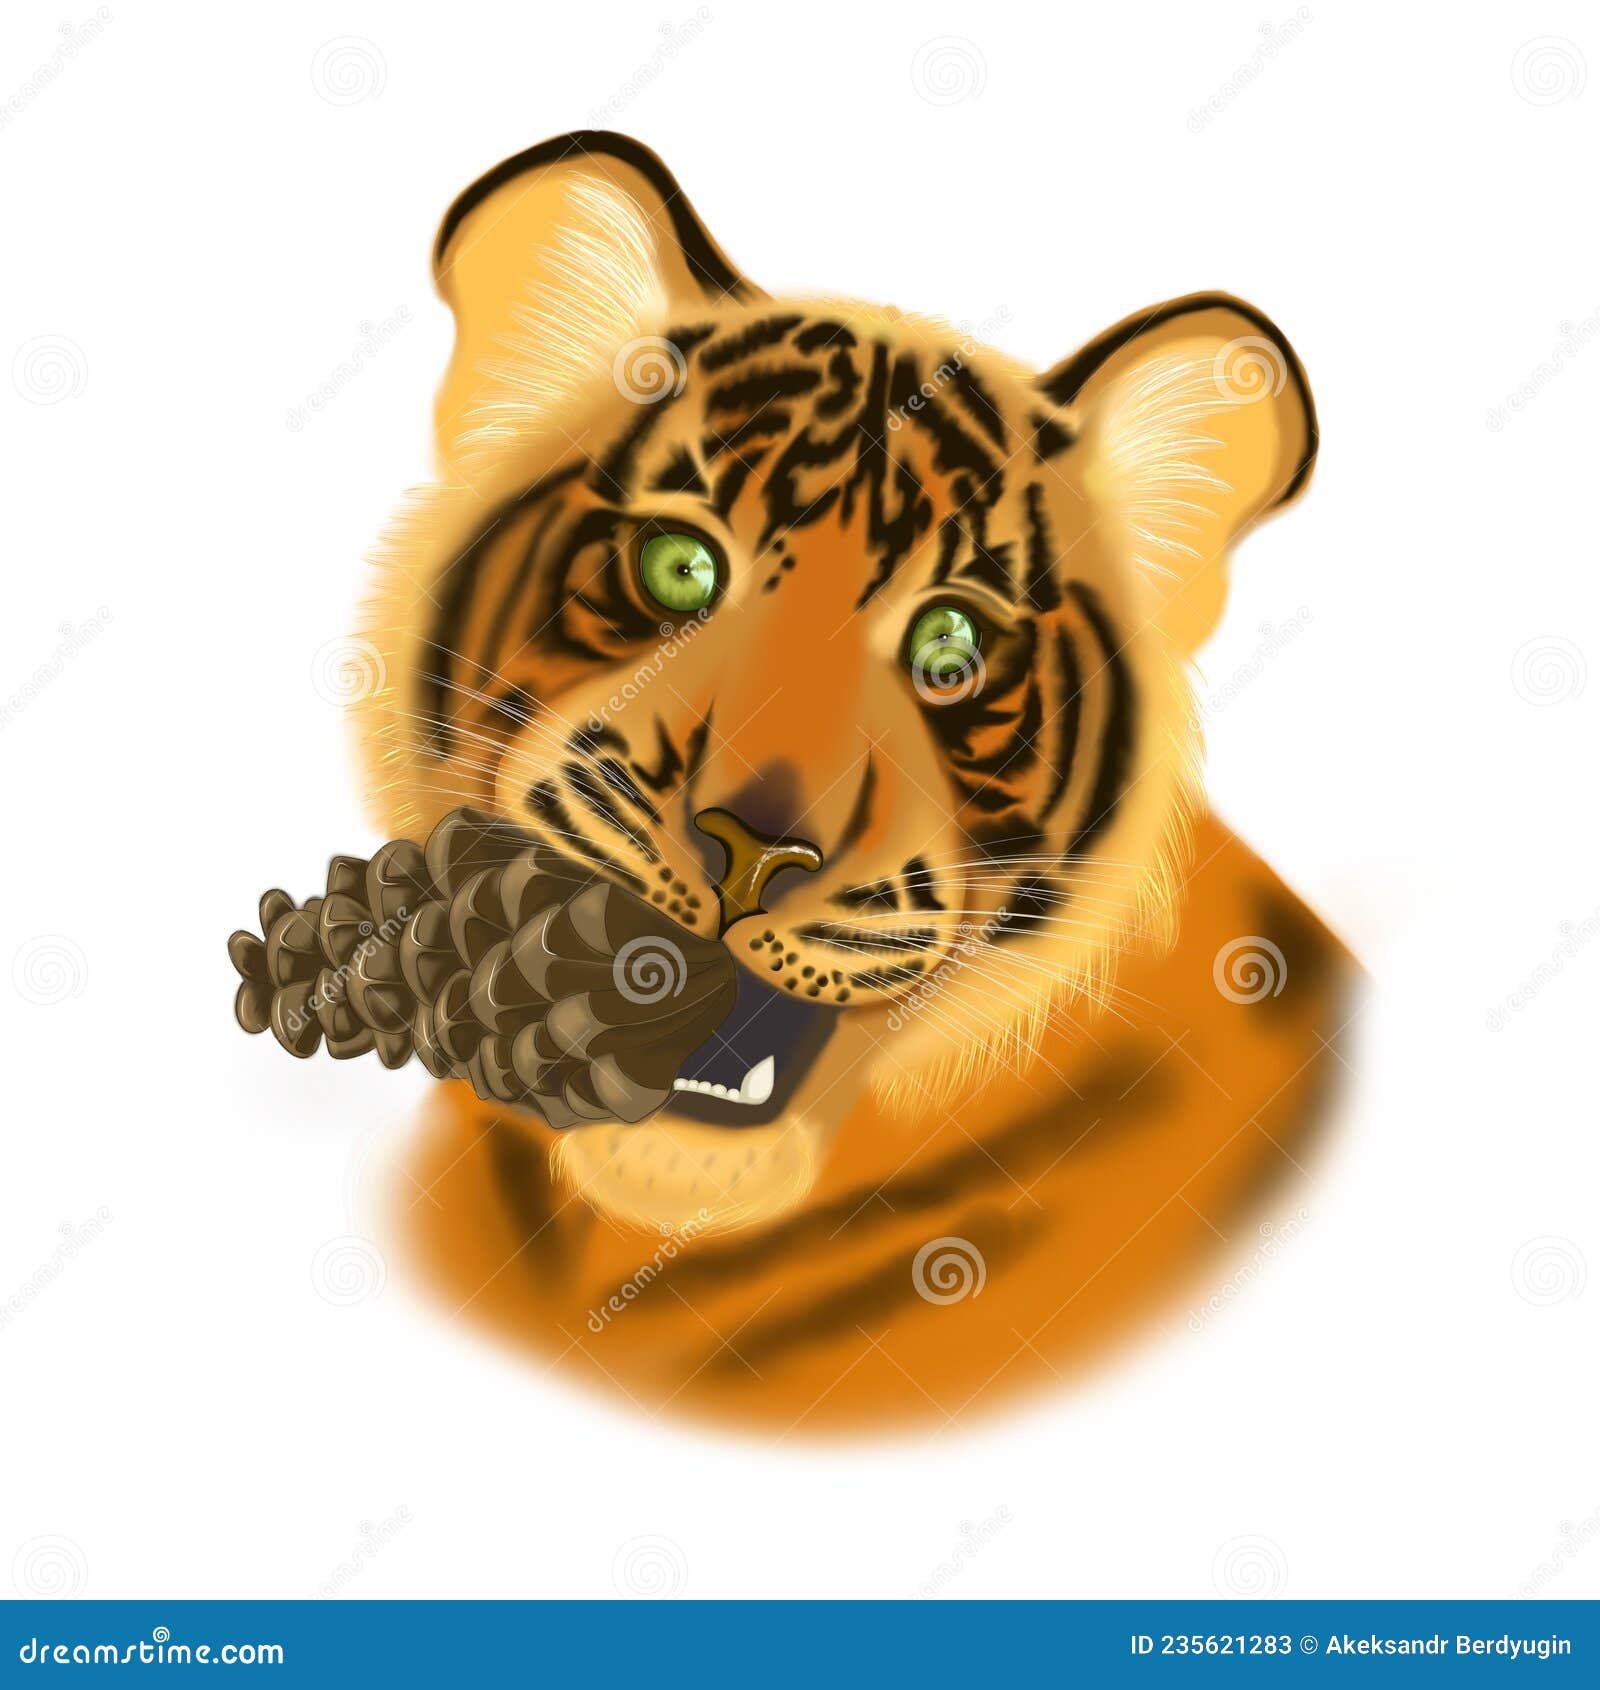 Cute Baby Tiger Symbol 2022, 2034 New Year, Picture in Hand Drawing Cartoon  Style, for T-shirt Wear Fashion Print Design, Greeting Stock Illustration -  Illustration of nature, poster: 235621283